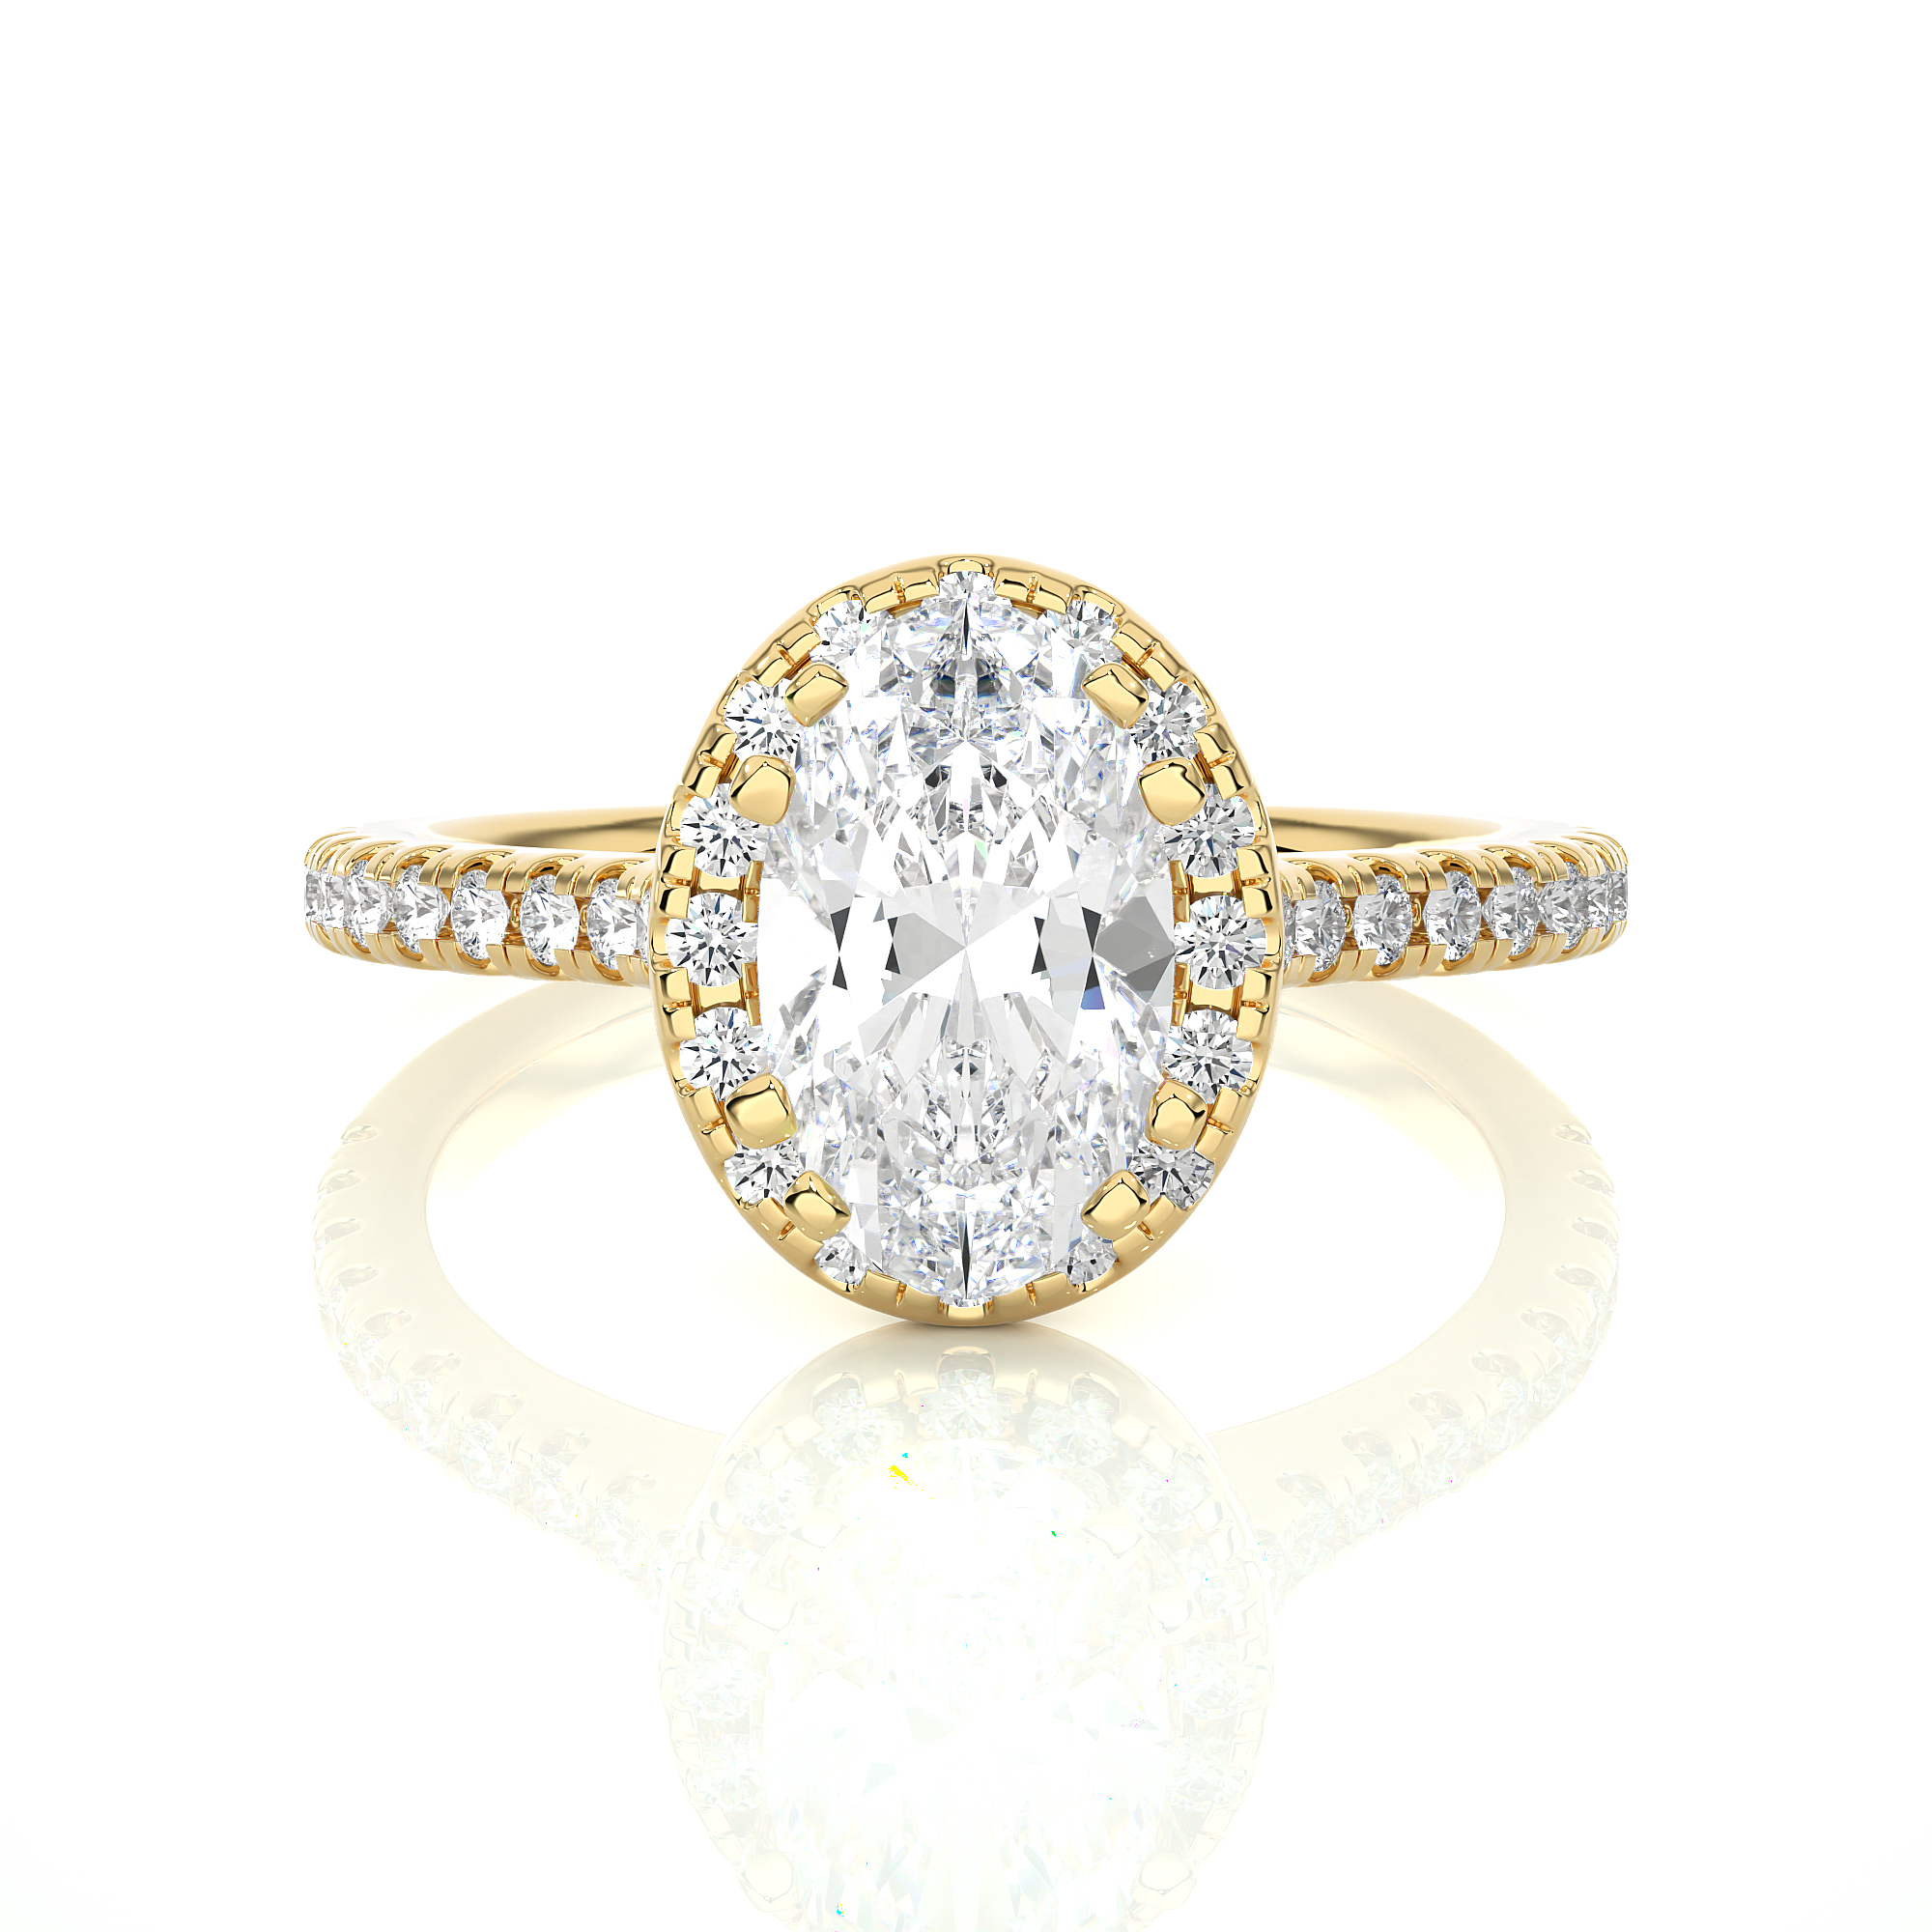 1.49Ct Oval Shaped Solitaire Diamond Ring in Yellow Gold - Blu Diamonds